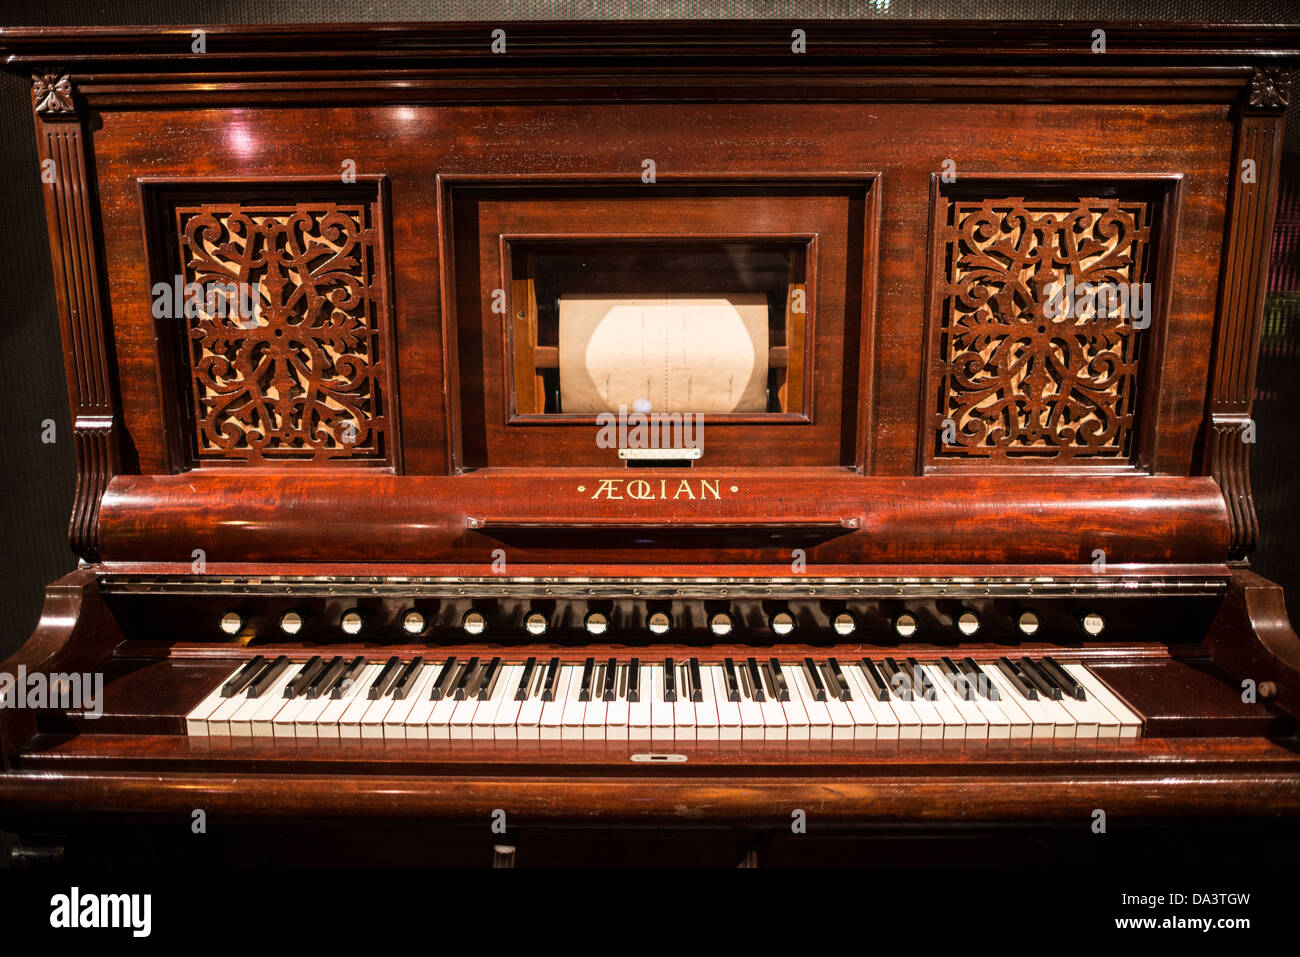 BRUSSELS, Belgium - A harmonium built by the Aeolian Organ and Music Co in New York around 1890 on display in the Musical Instrument Museum in Brussels. The Musee des Instruments de Musique (Musical Instrument Museum) in Brussels contains exhibits containing more than 2000 musical instruments. Displays include historical, exotic, and traditional cultural instruments from around the world. Visitors to the museum are given handheld audio guides that play musical demonstrations of many of the instruments. The museum is housed in the distinctive Old England Building. Stock Photo